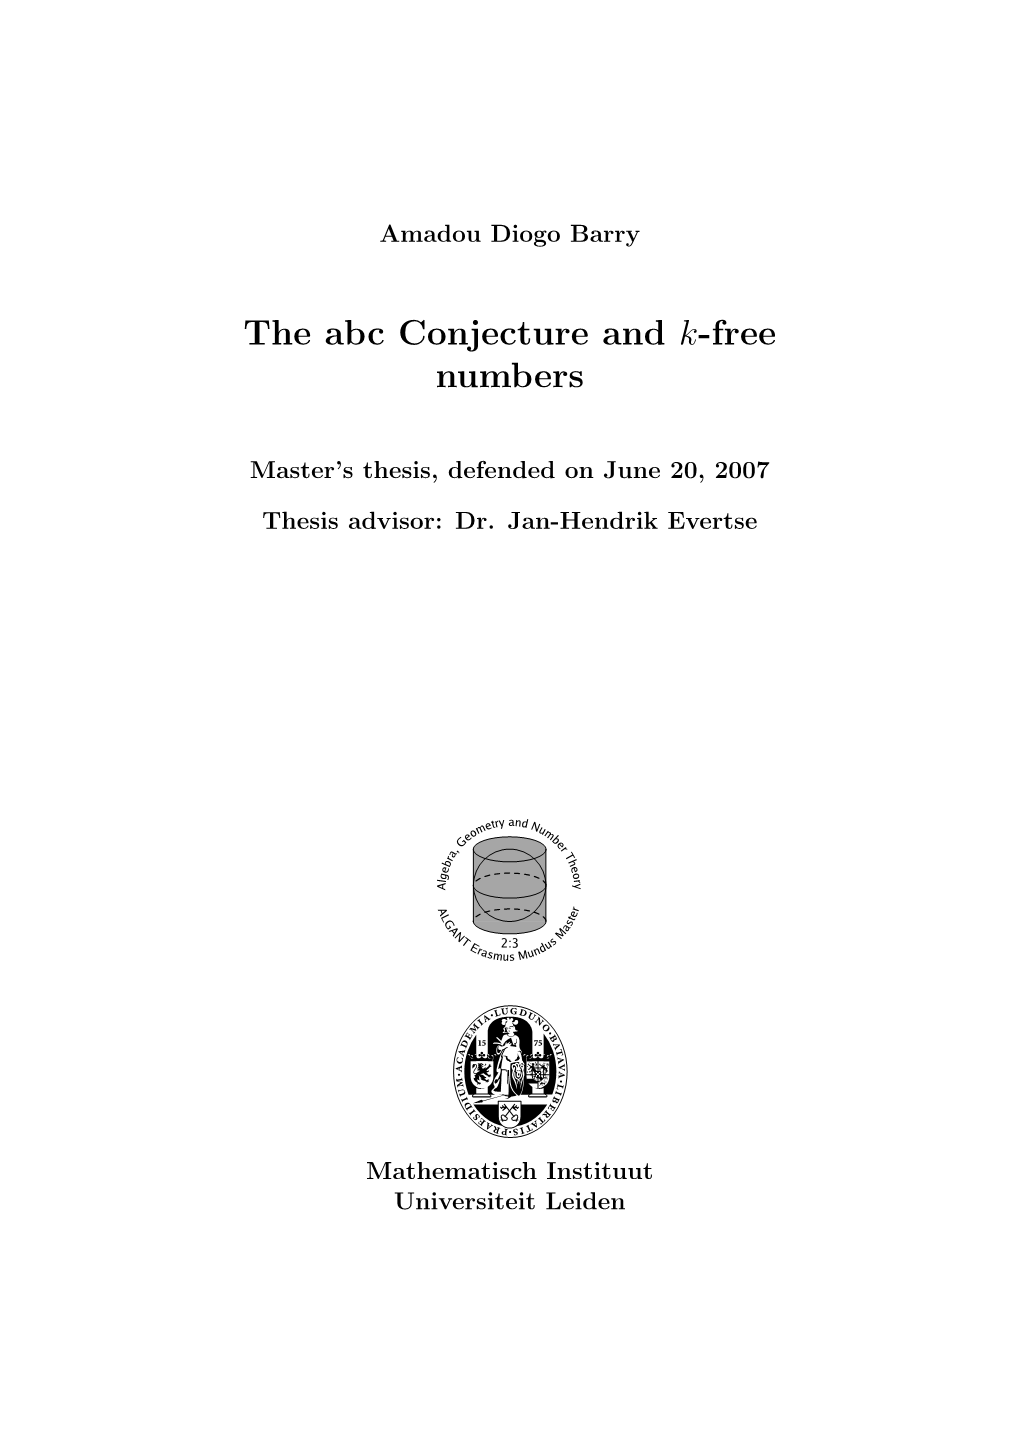 The Abc Conjecture and K-Free Numbers